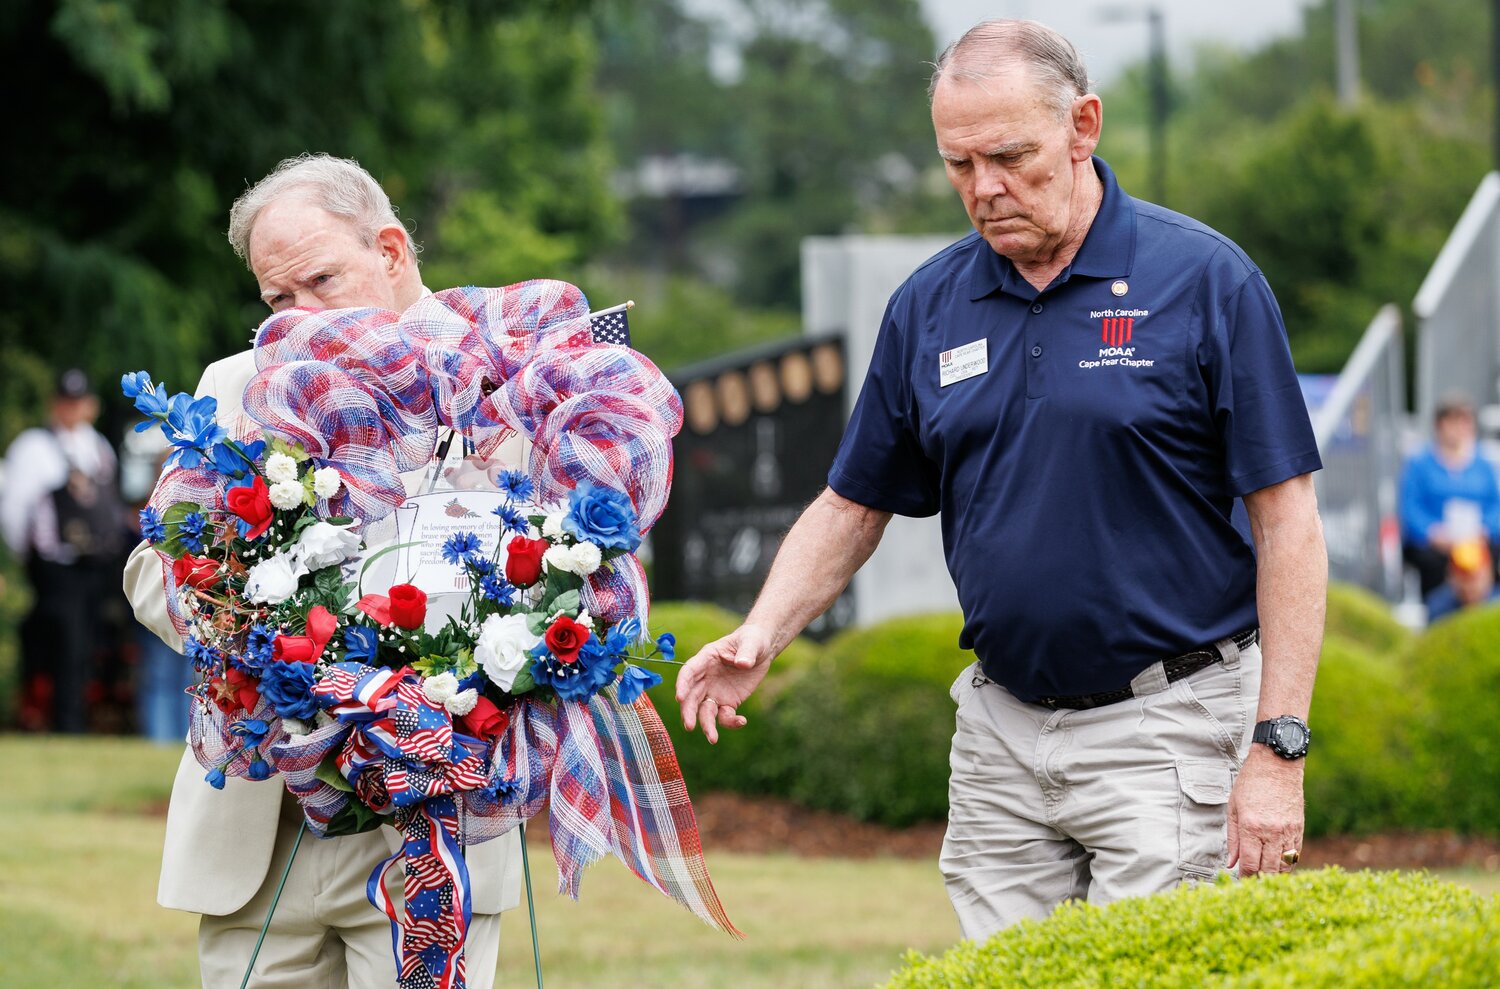 Wreaths are laid at monuments during the Memorial Day ceremony at Freedom Memorial Park.